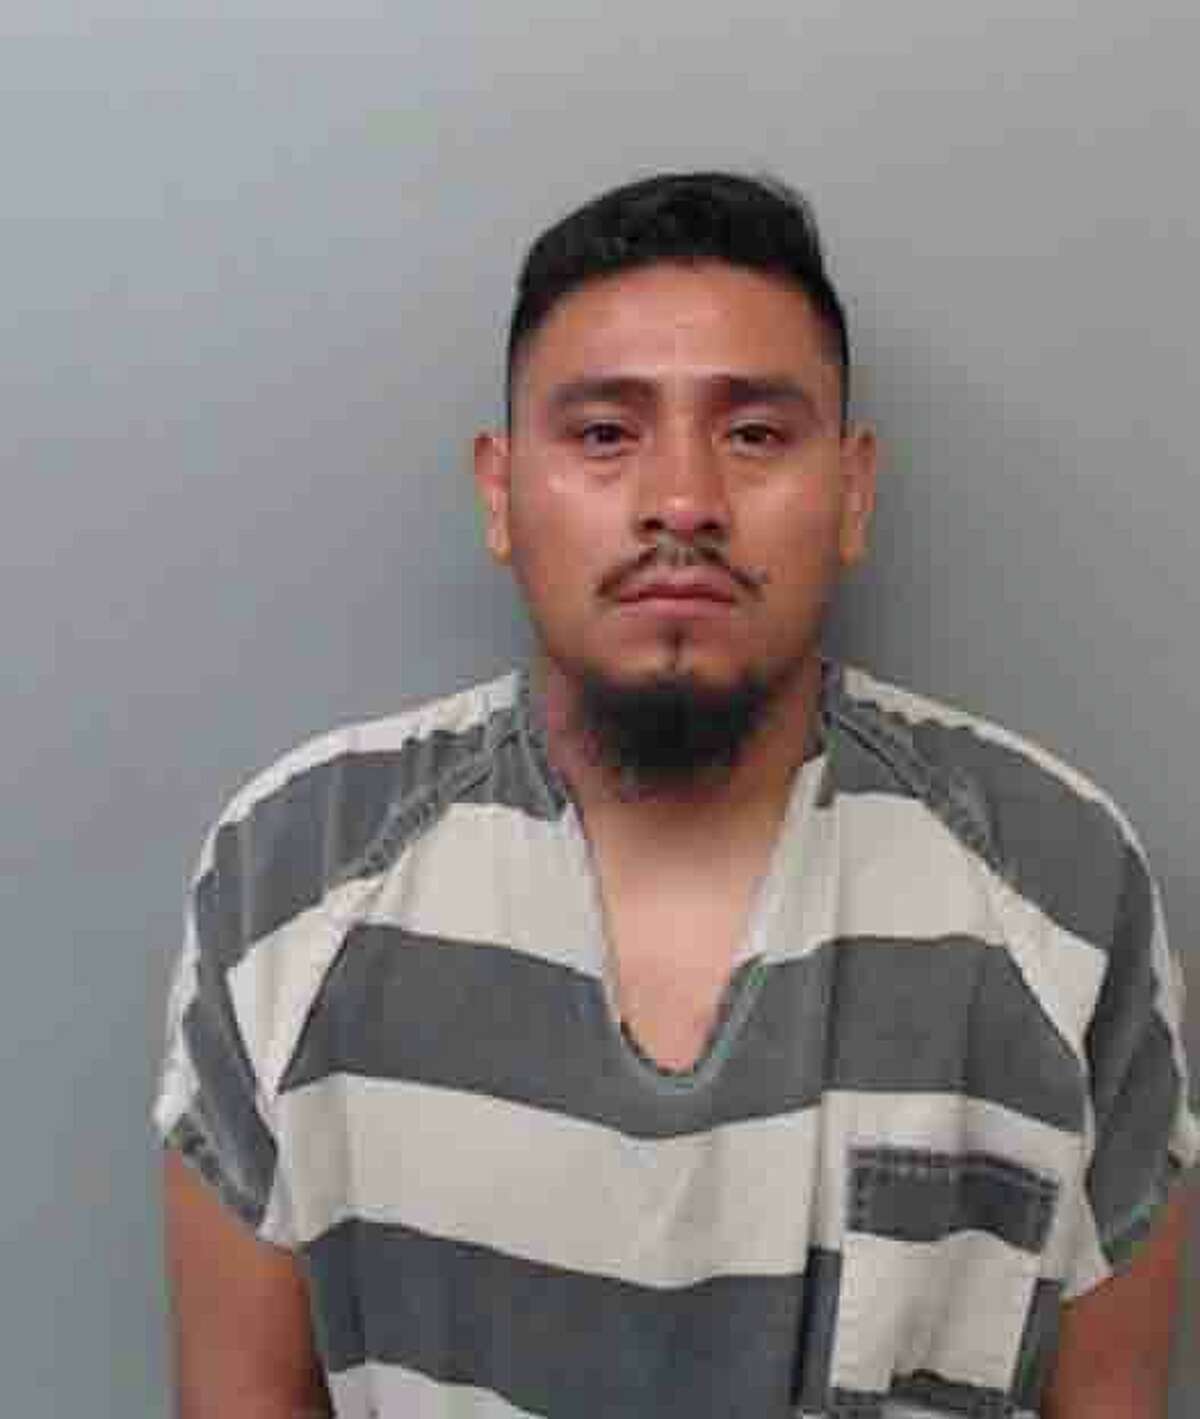 Antonio Ramos Santiago, 30, was charged with assault, family violence and injury to a child.